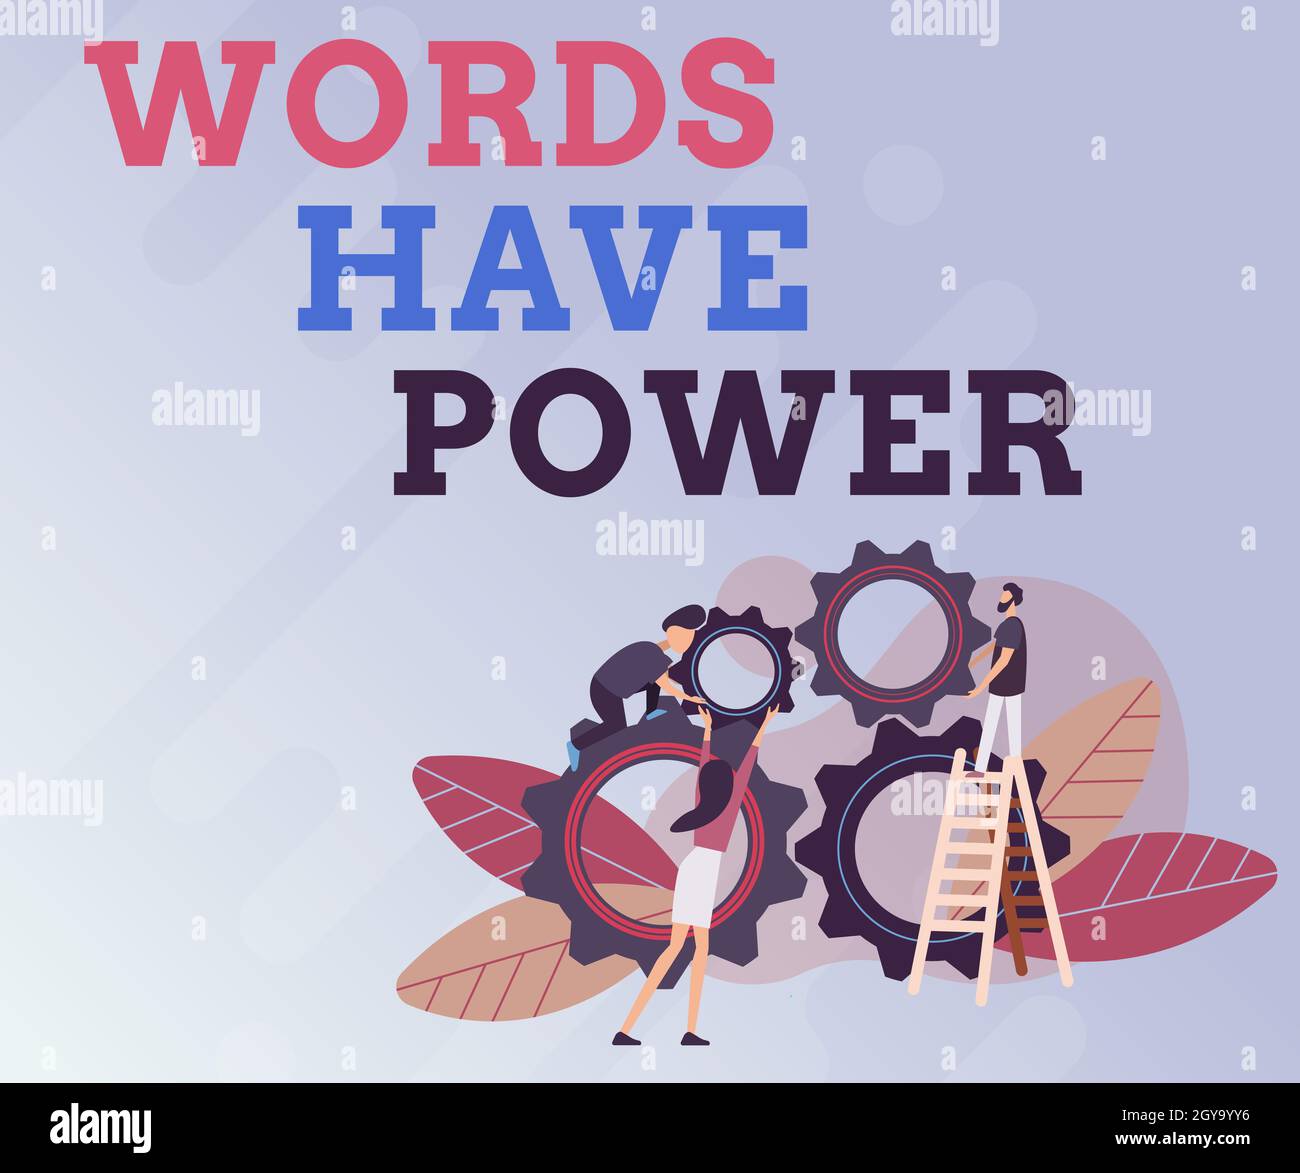 Text showing inspiration Words Have Power, Business idea essential tools individuals use to communicate and learn Abstract Helping Build Community, So Stock Photo